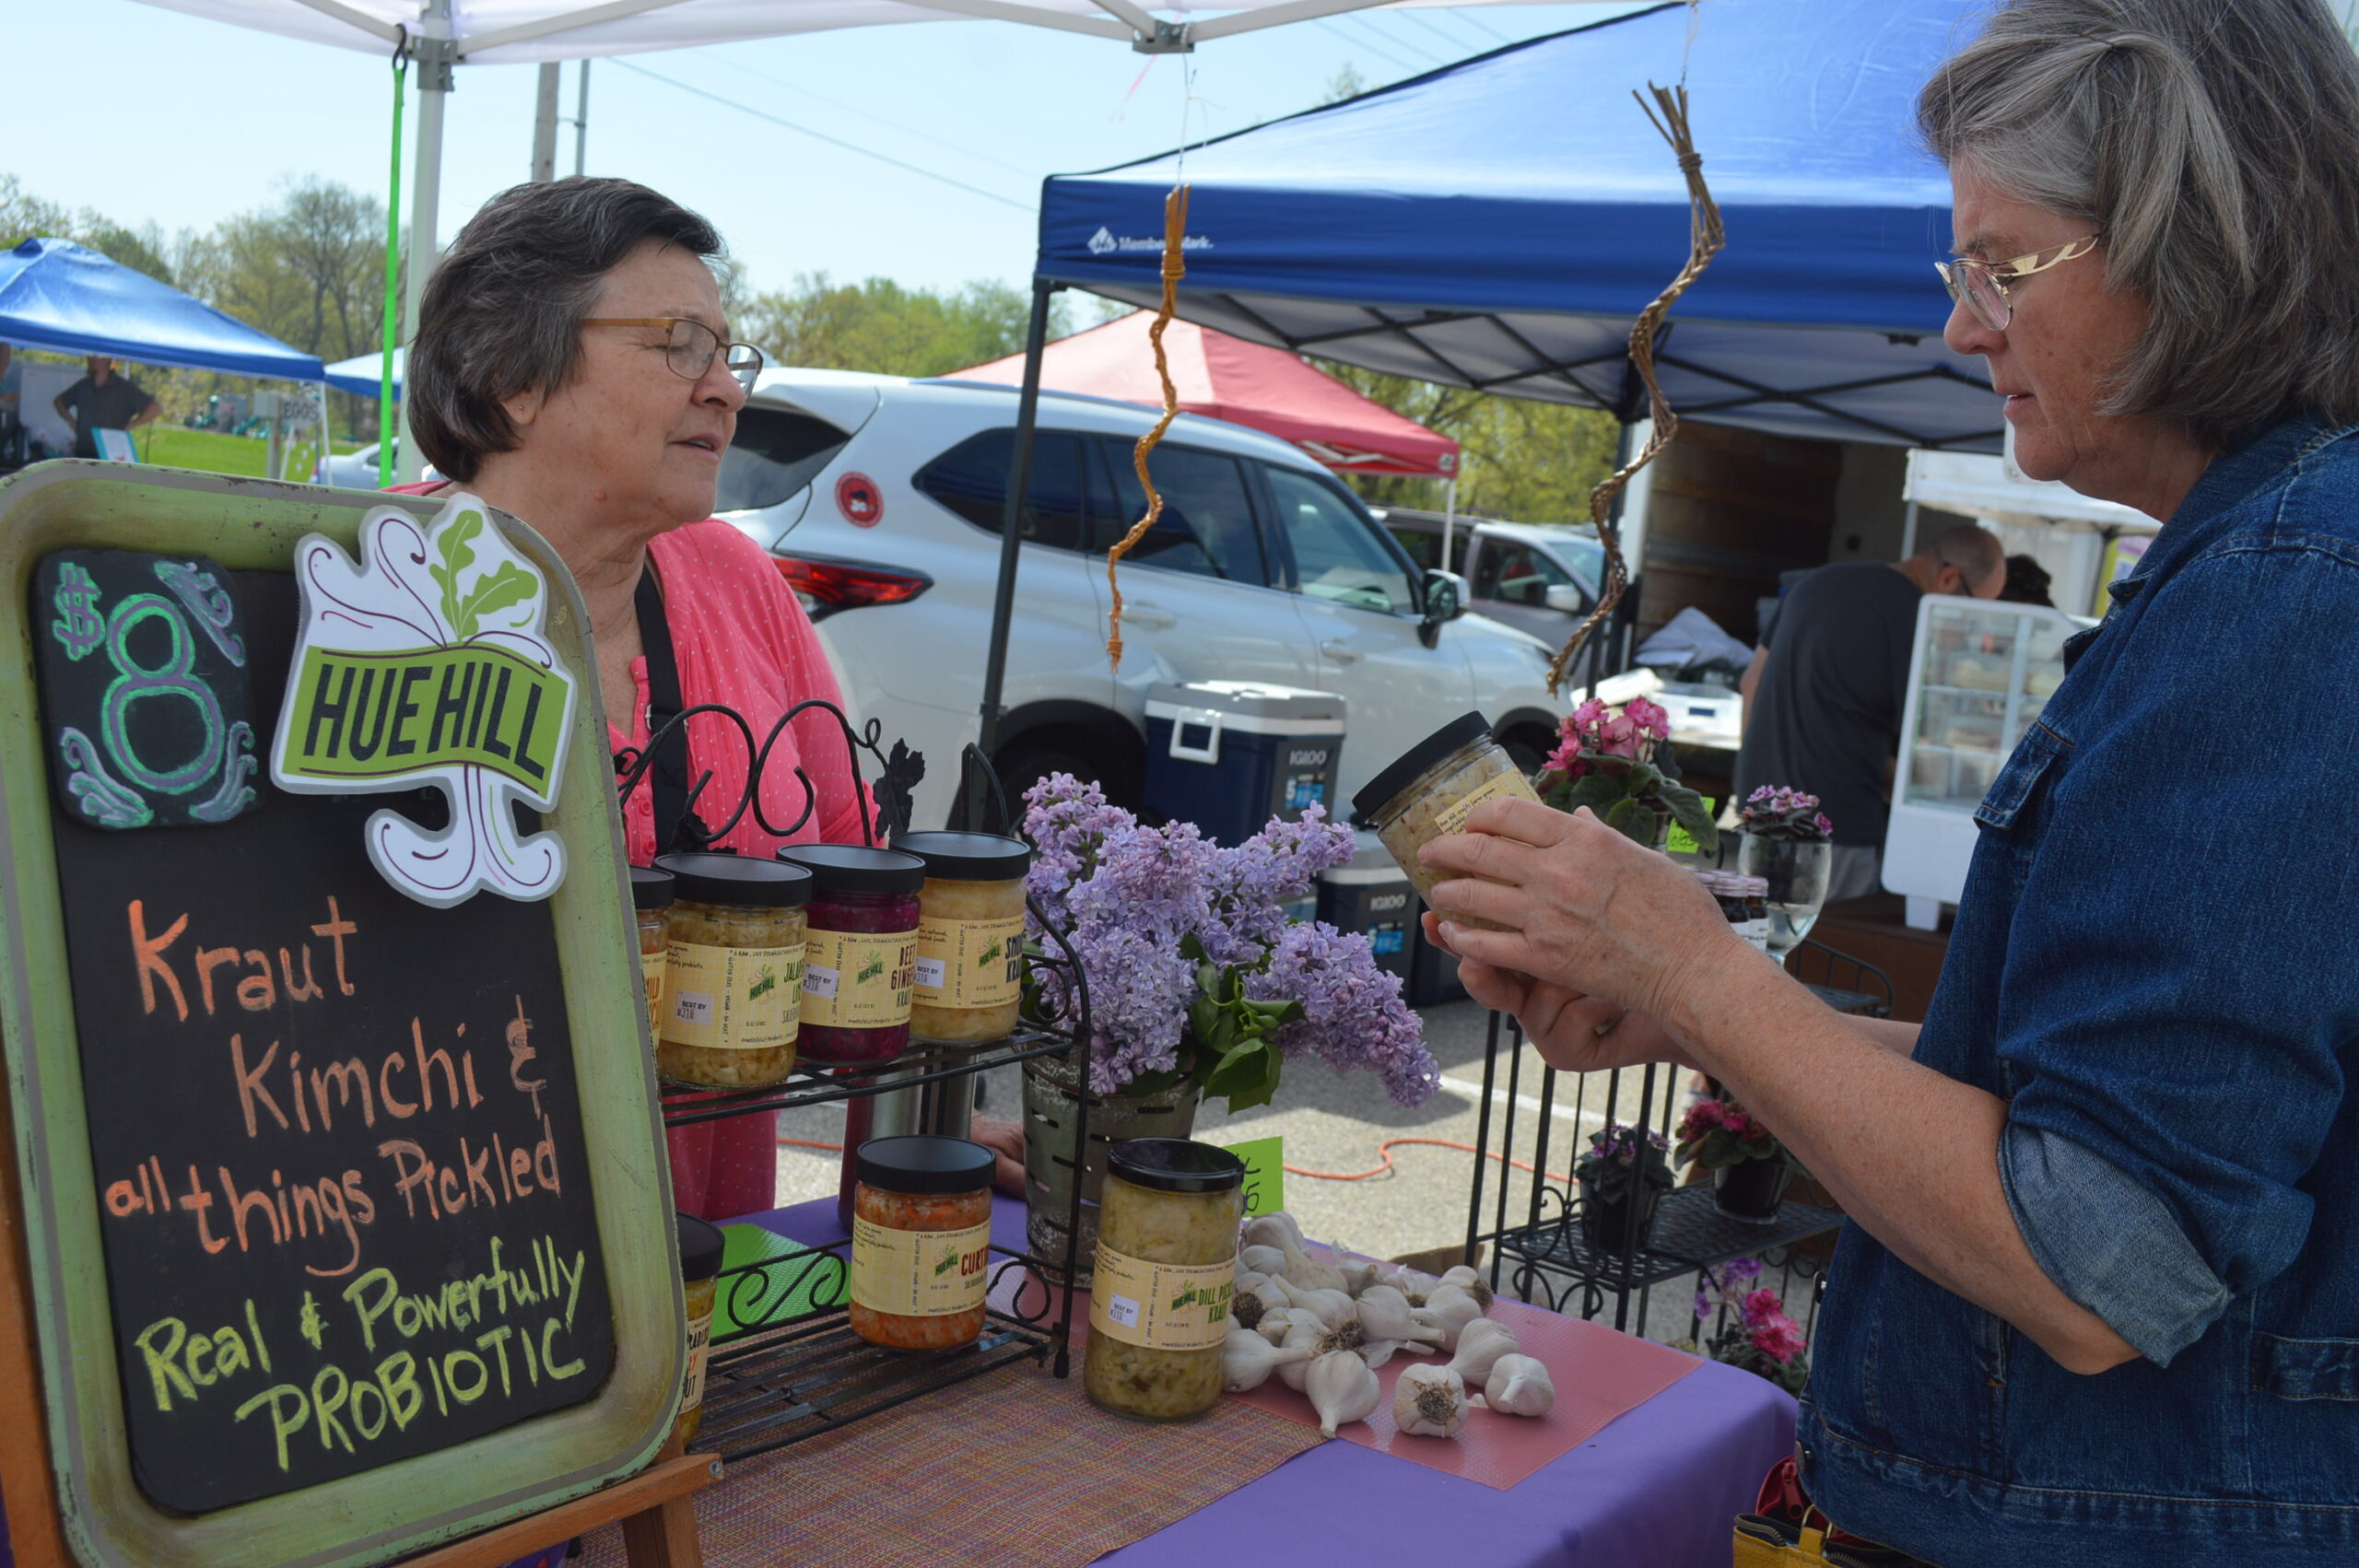 Customer Joni Tibbits of Robins, right, discusses products offered at the Hue Hill stand with vendor Jean Donohue during the Hiawatha Farmers Market on Sunday, May 7. CREDIT CINDY HADISH